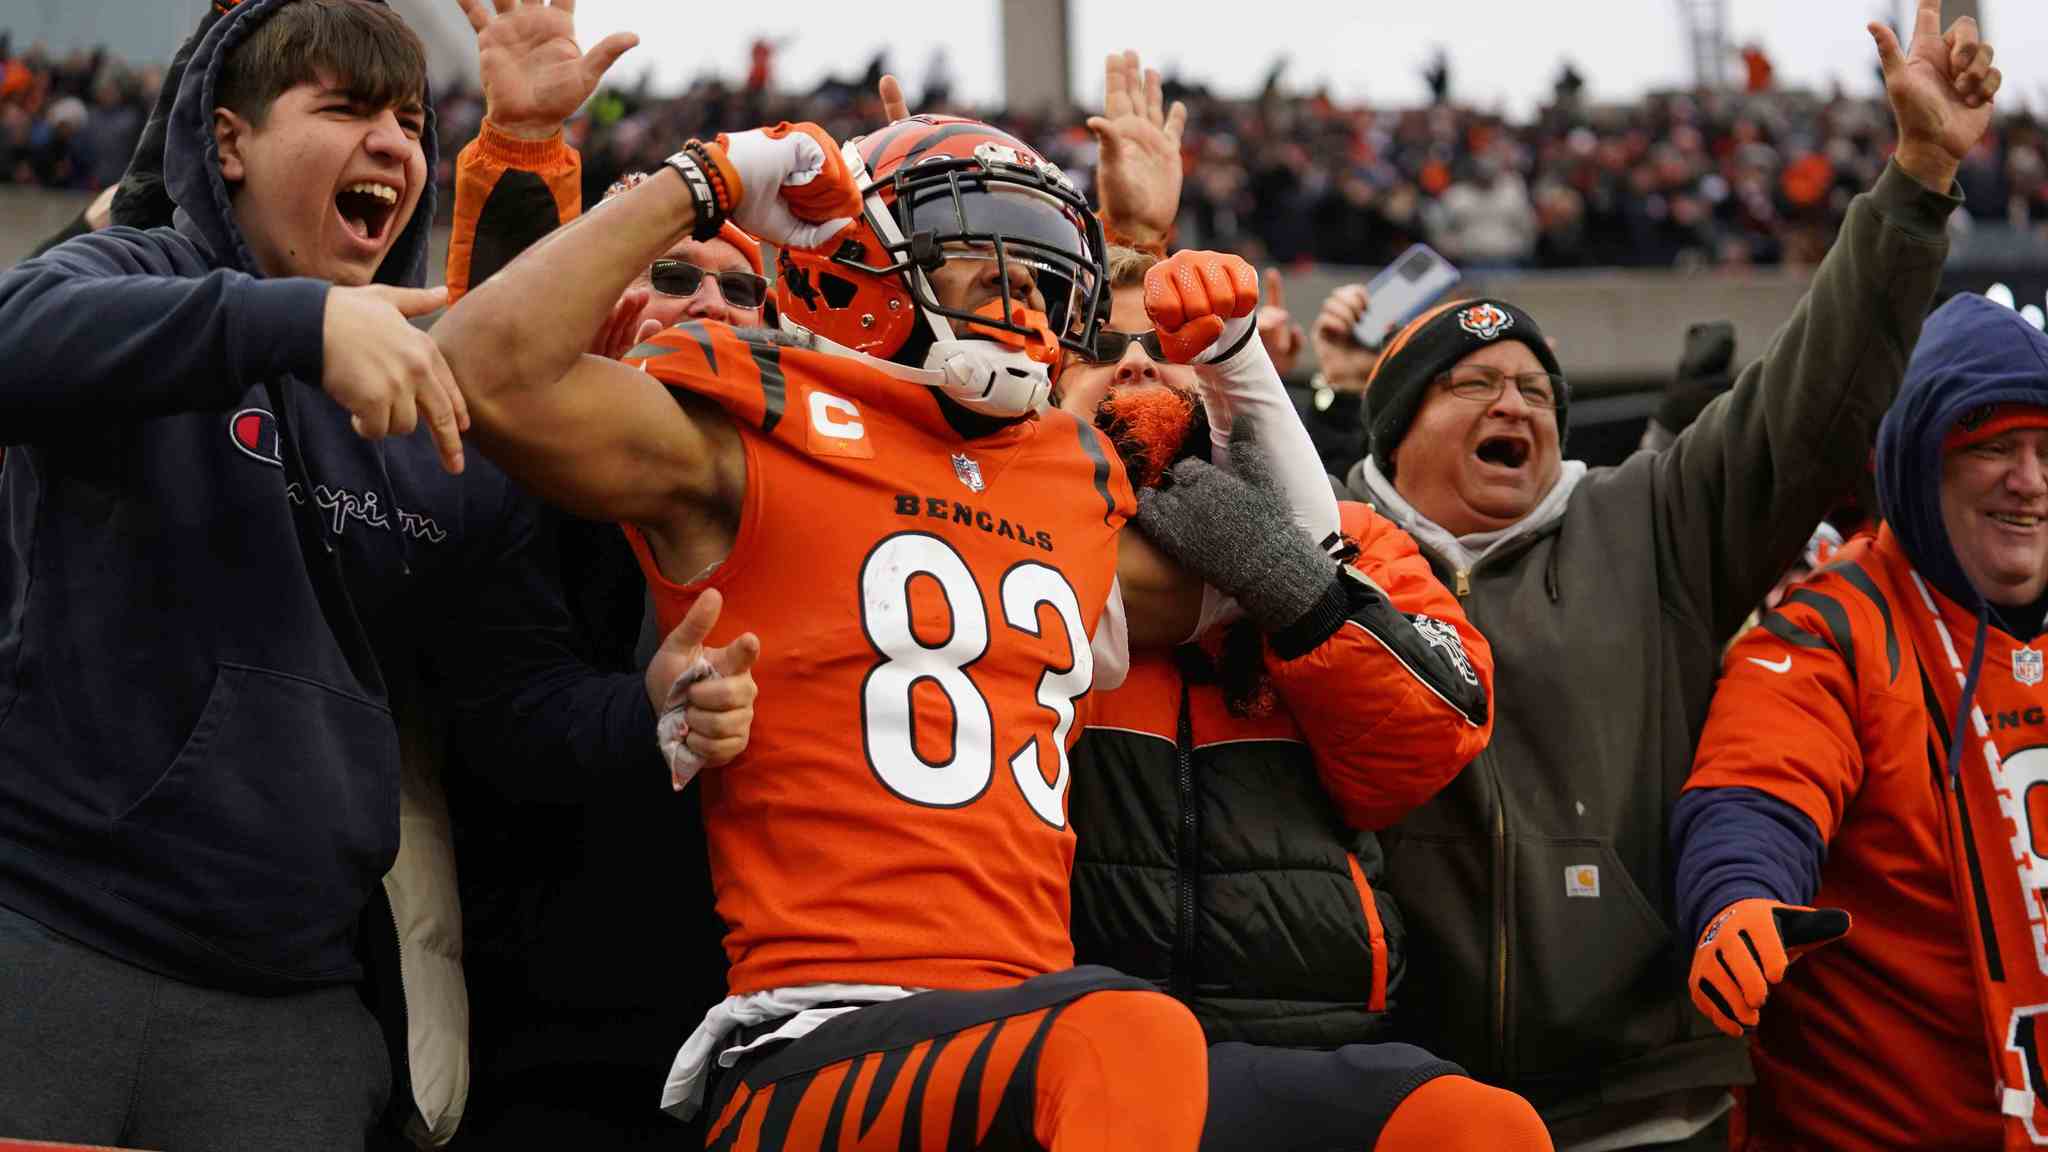 BENGALS ARE GOING TO THE AFC TITLE GAME FOR THE FIRST TIME SINCE